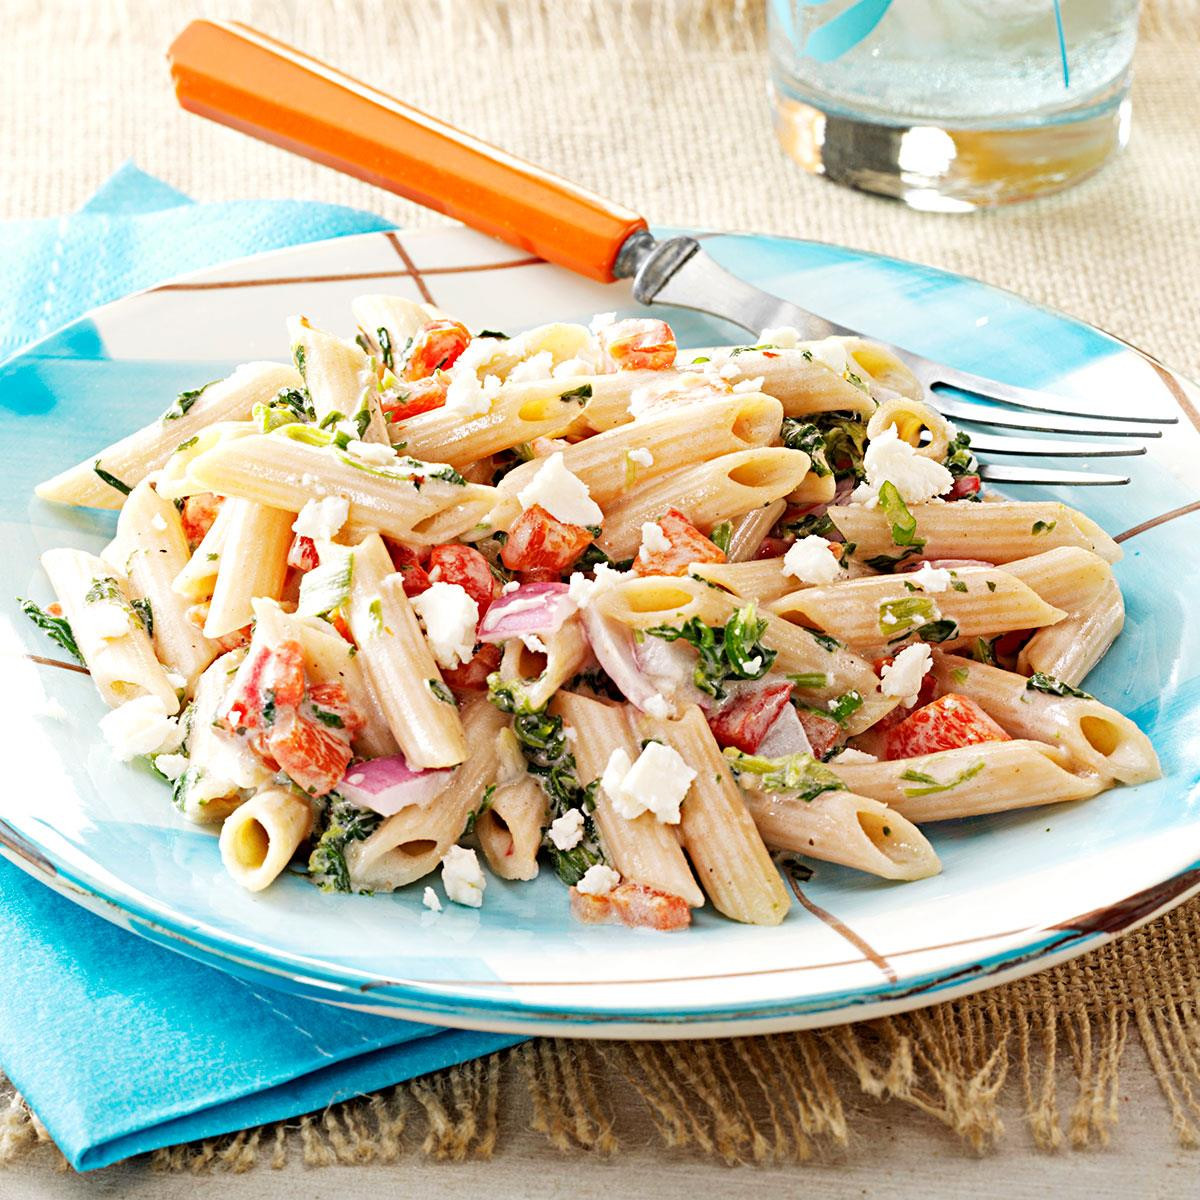 Taste Of Home Pasta Salad
 Easy Pasta Salad for a Crowd Recipe